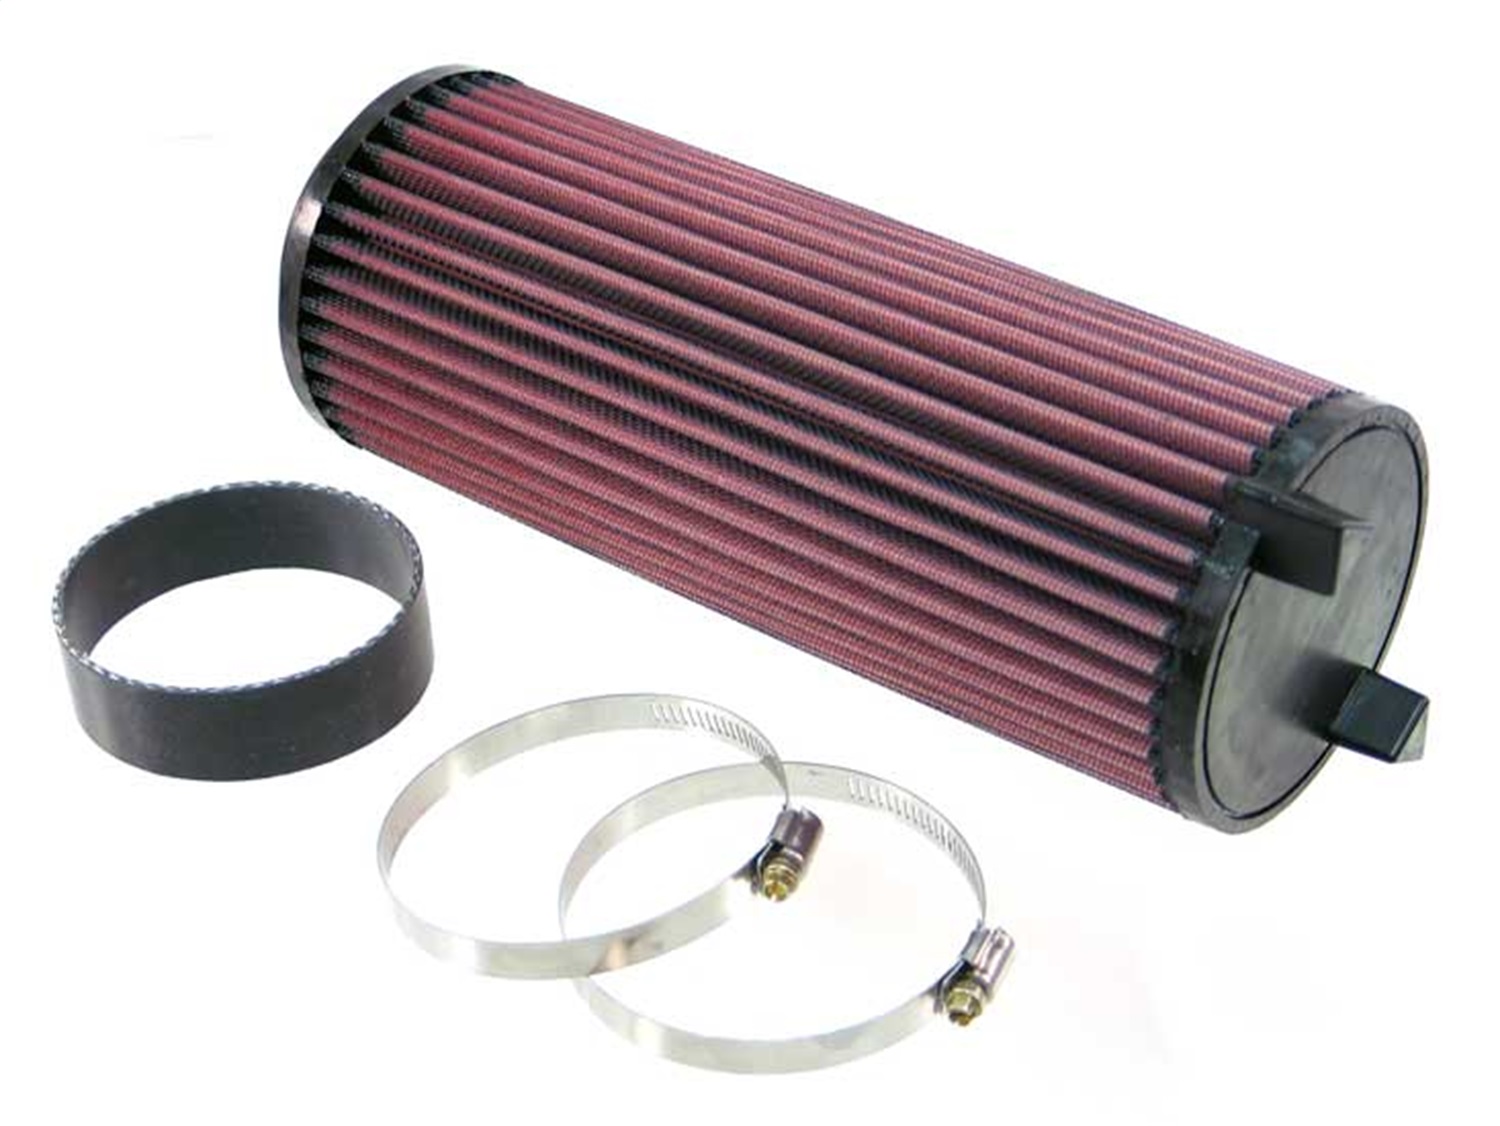 K&N Filters K&N Filters E-2019 Air Filter Fits 04-07 S60 V70